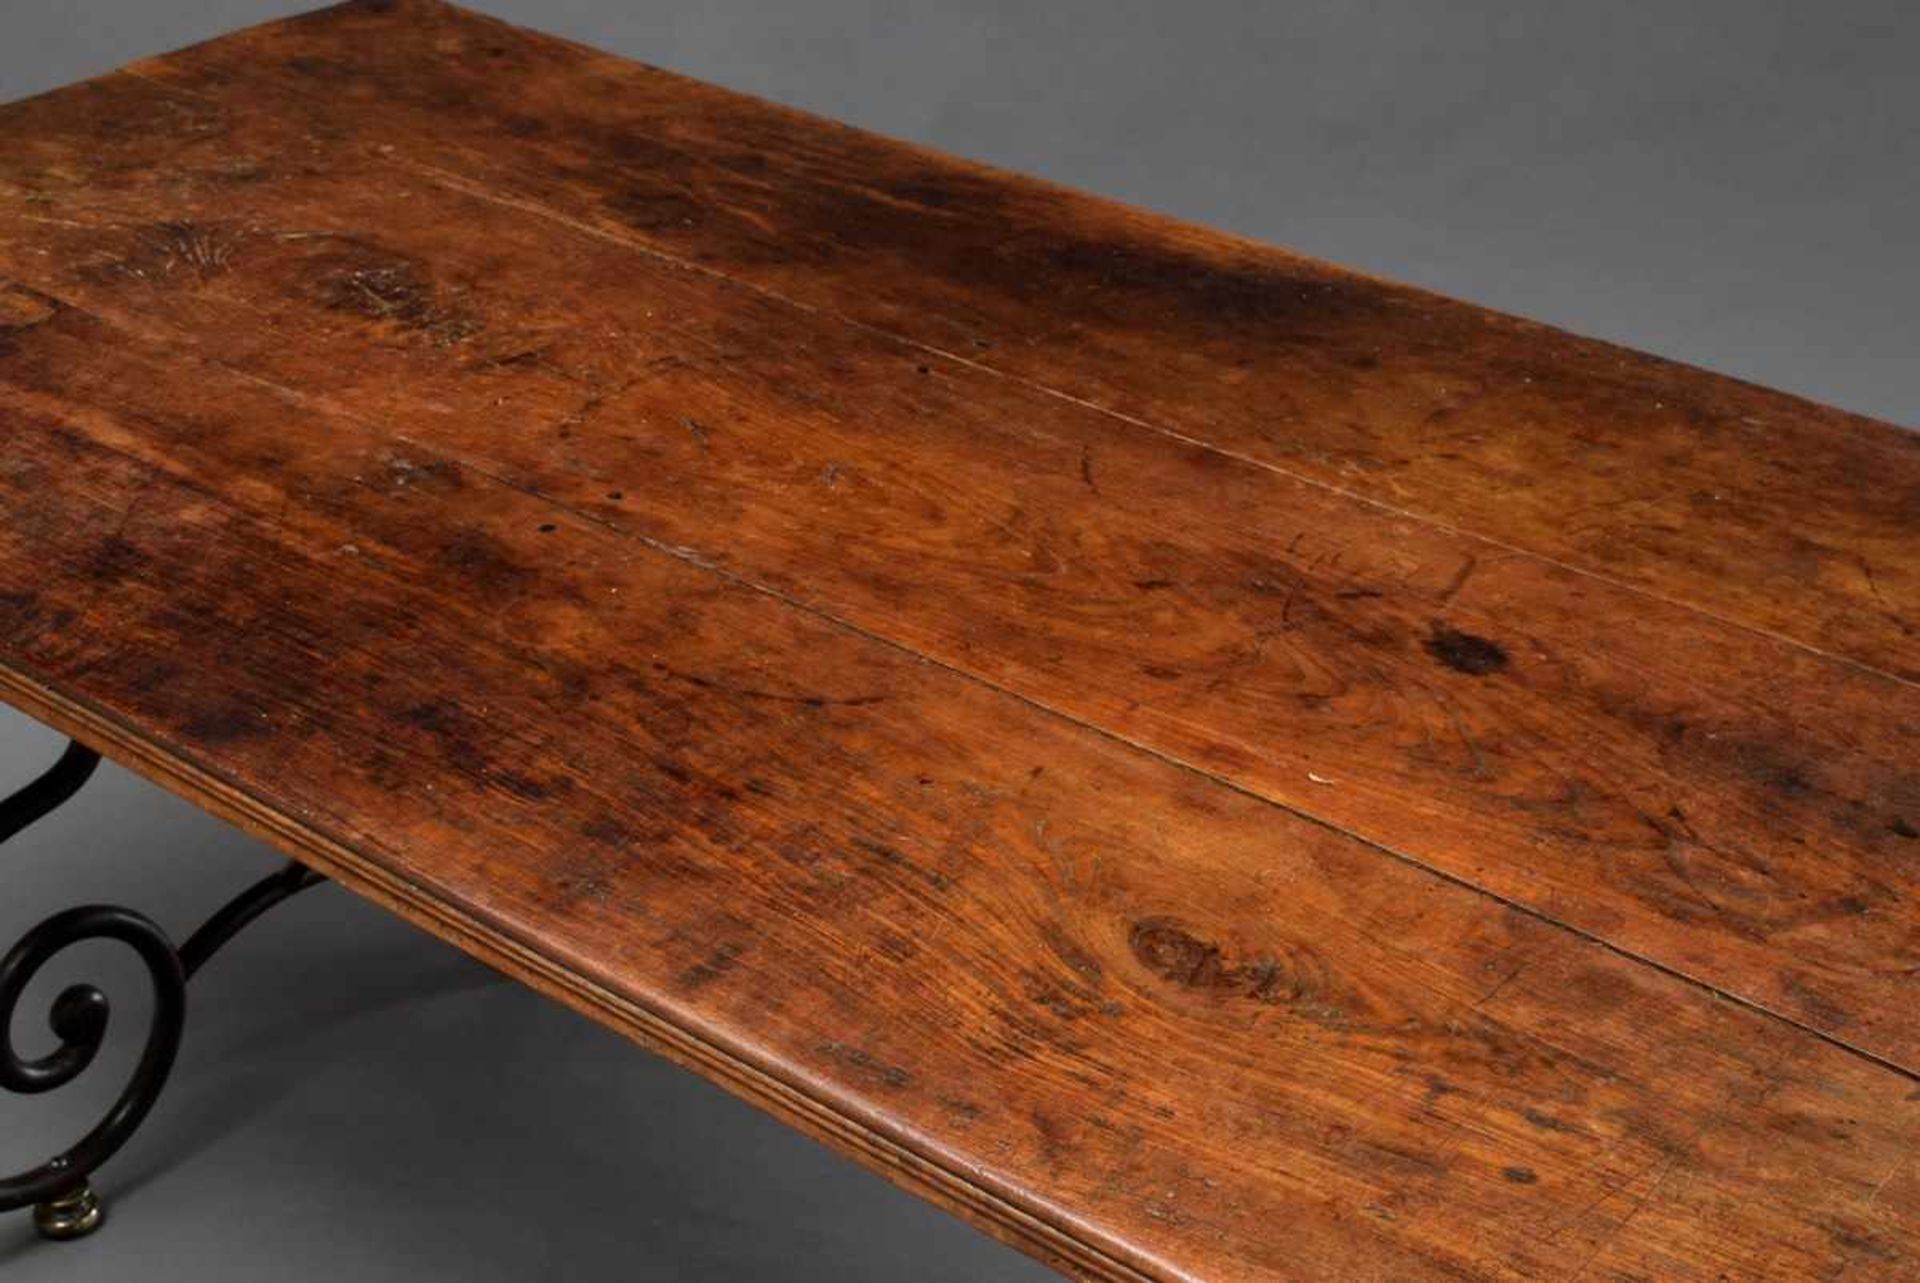 Large french shop table on forged iron frame, 75.5x189x91.5cm, acquired from Hans Otto Beute/Hbg. - Image 3 of 4